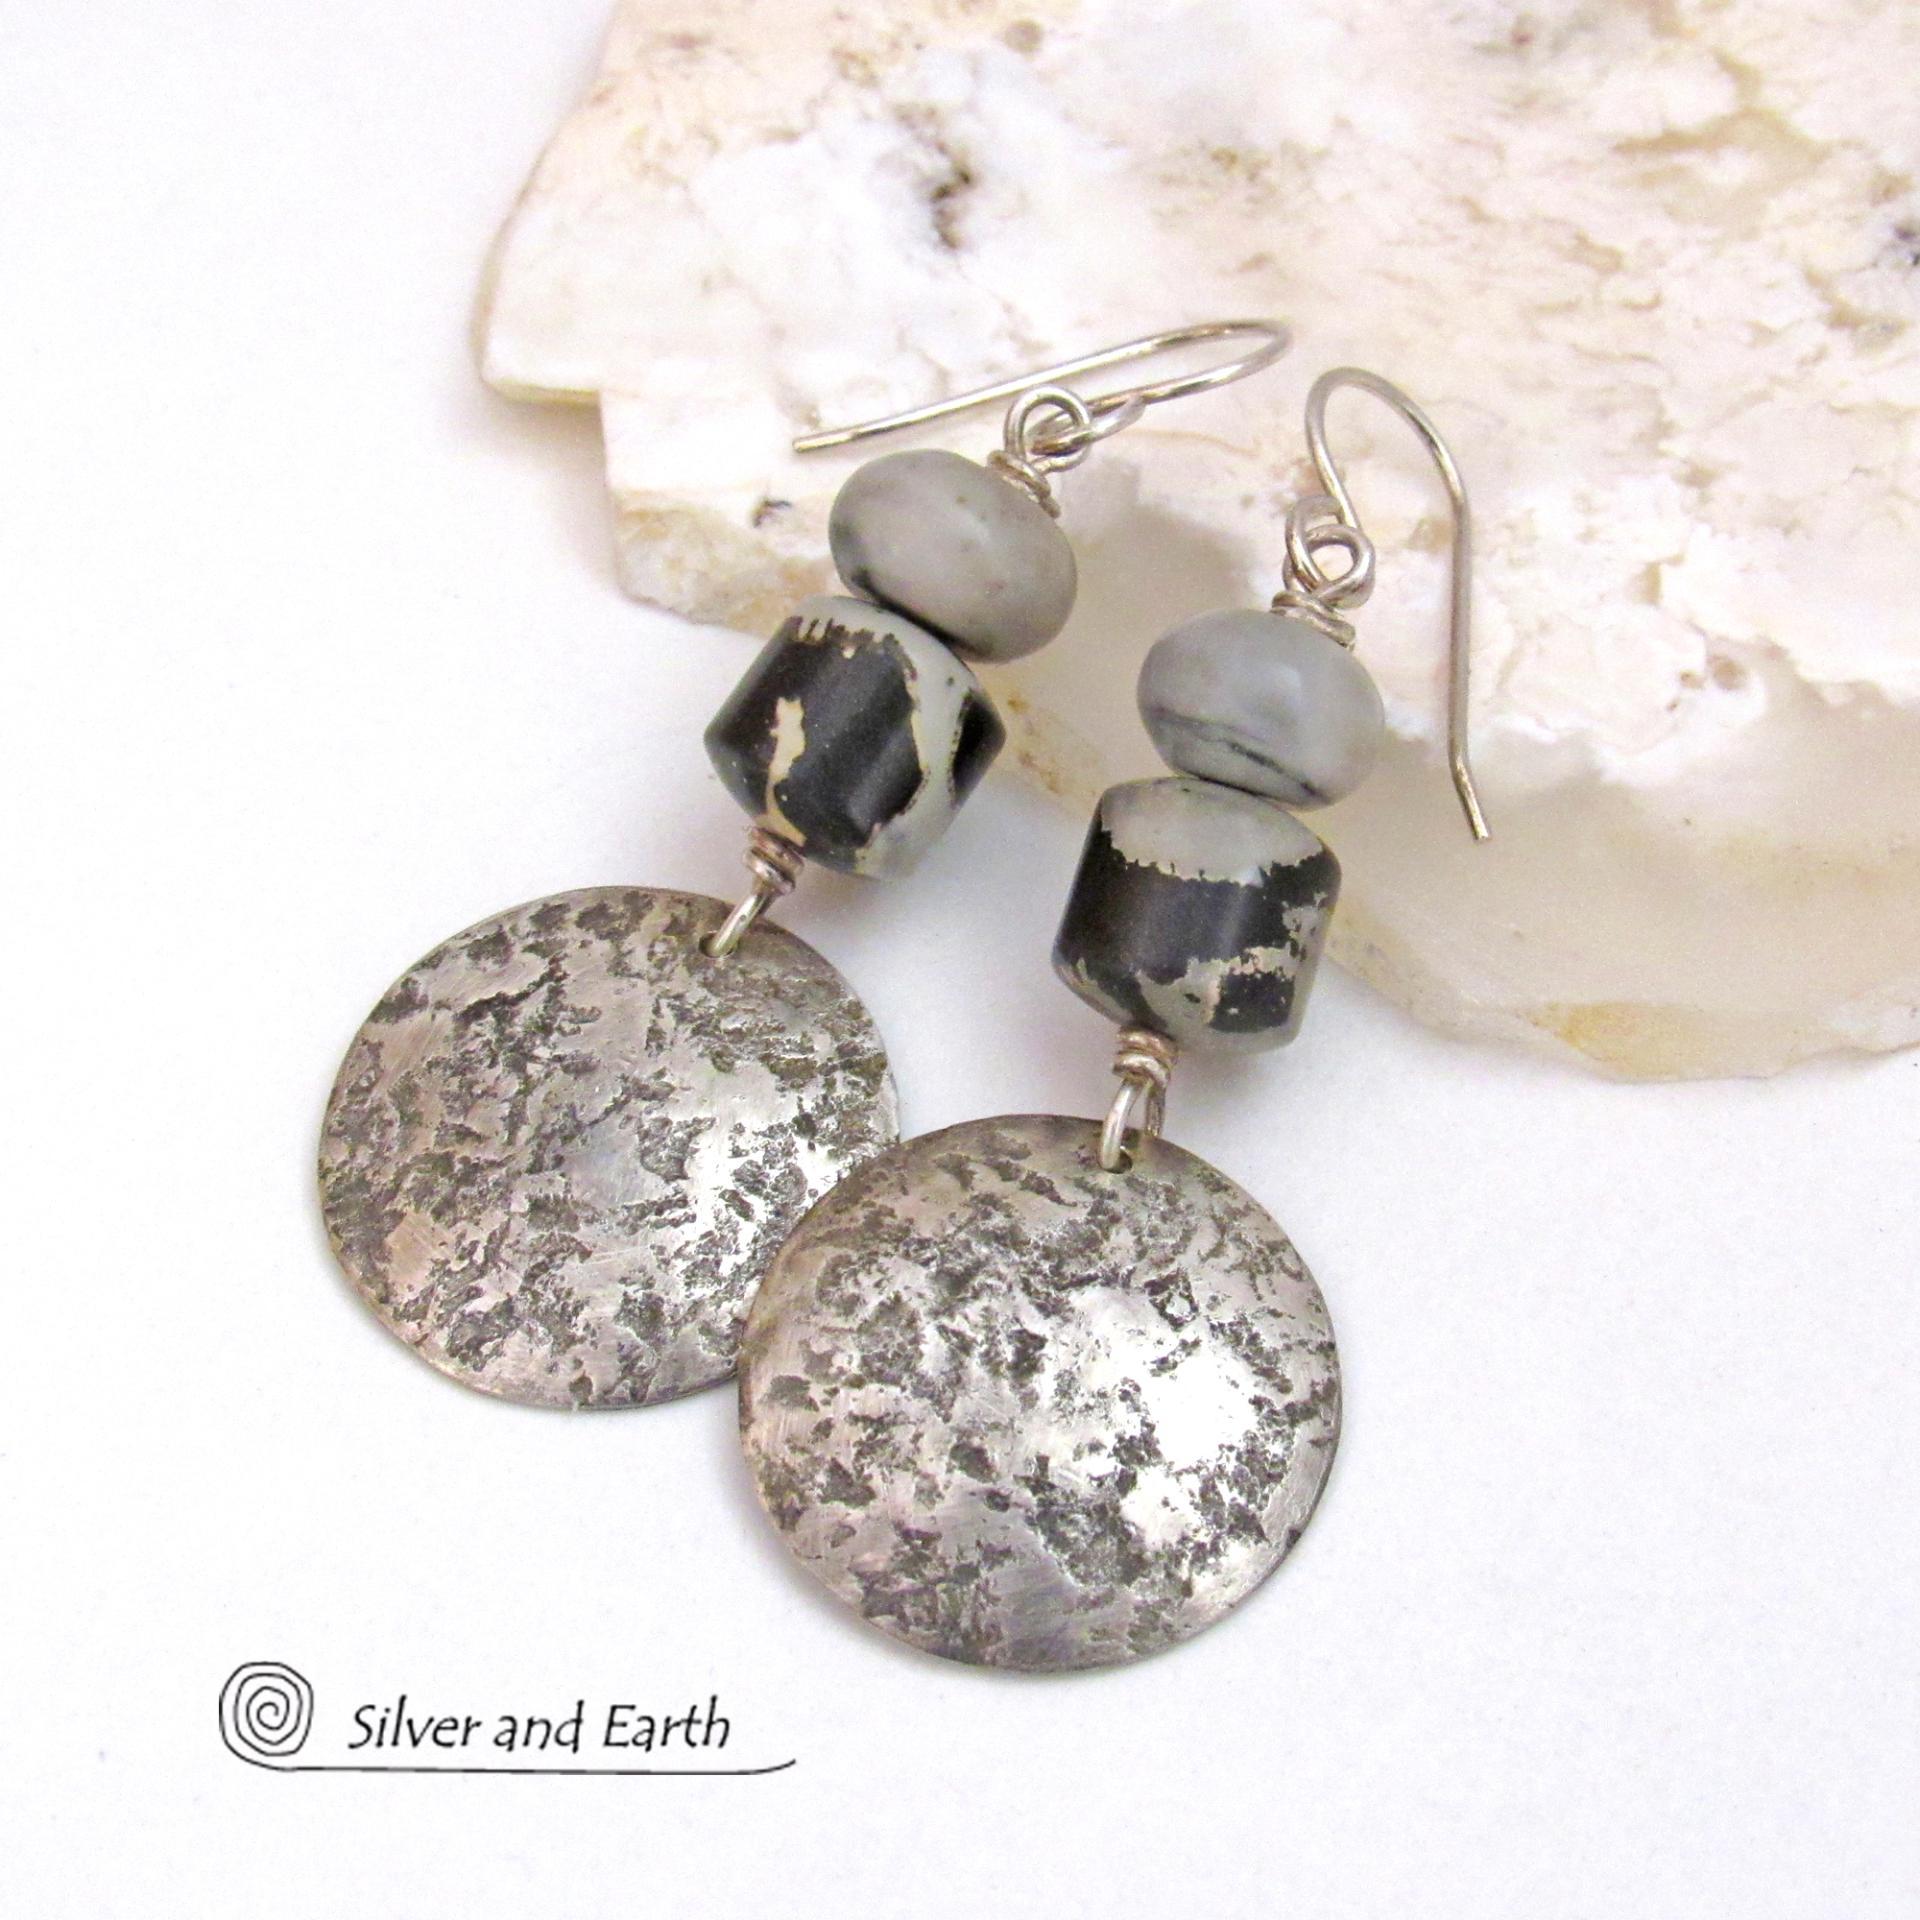 Rustic Hammered Sterling Silver Earrings with Black and Gray Jasper Stones